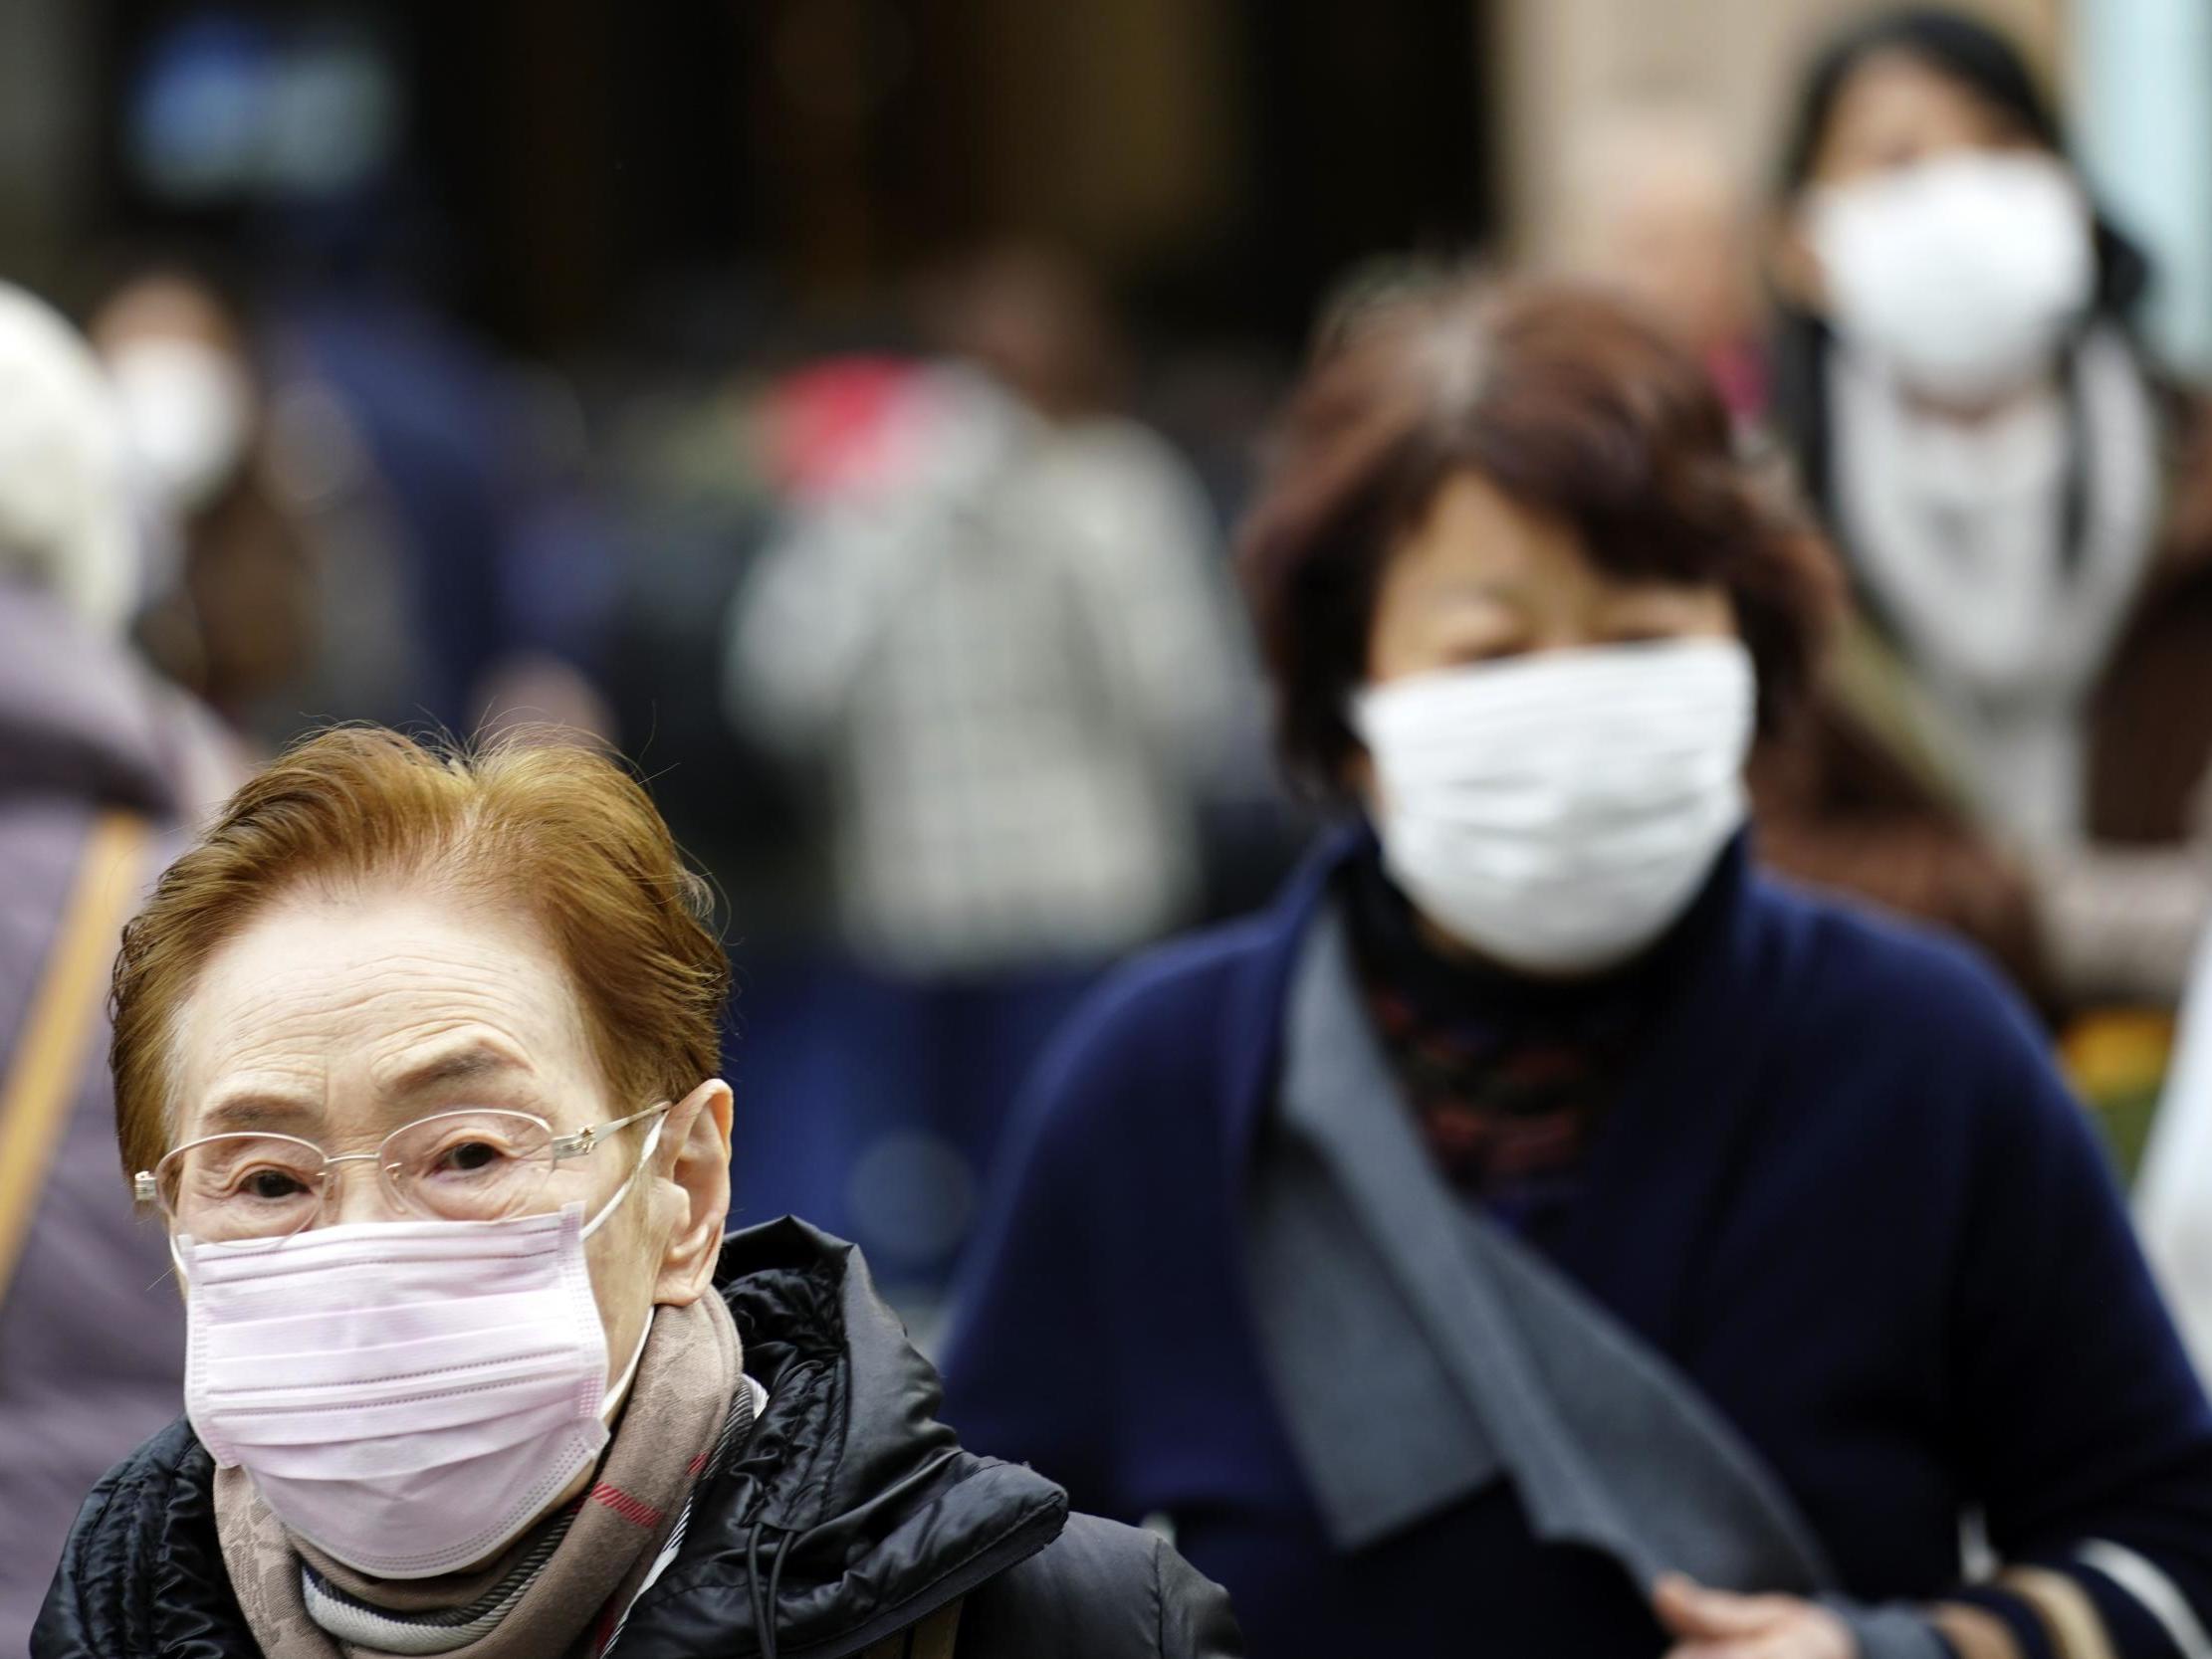 Chinese virus: Several US airports to screen travellers after mysterious outbreak ...